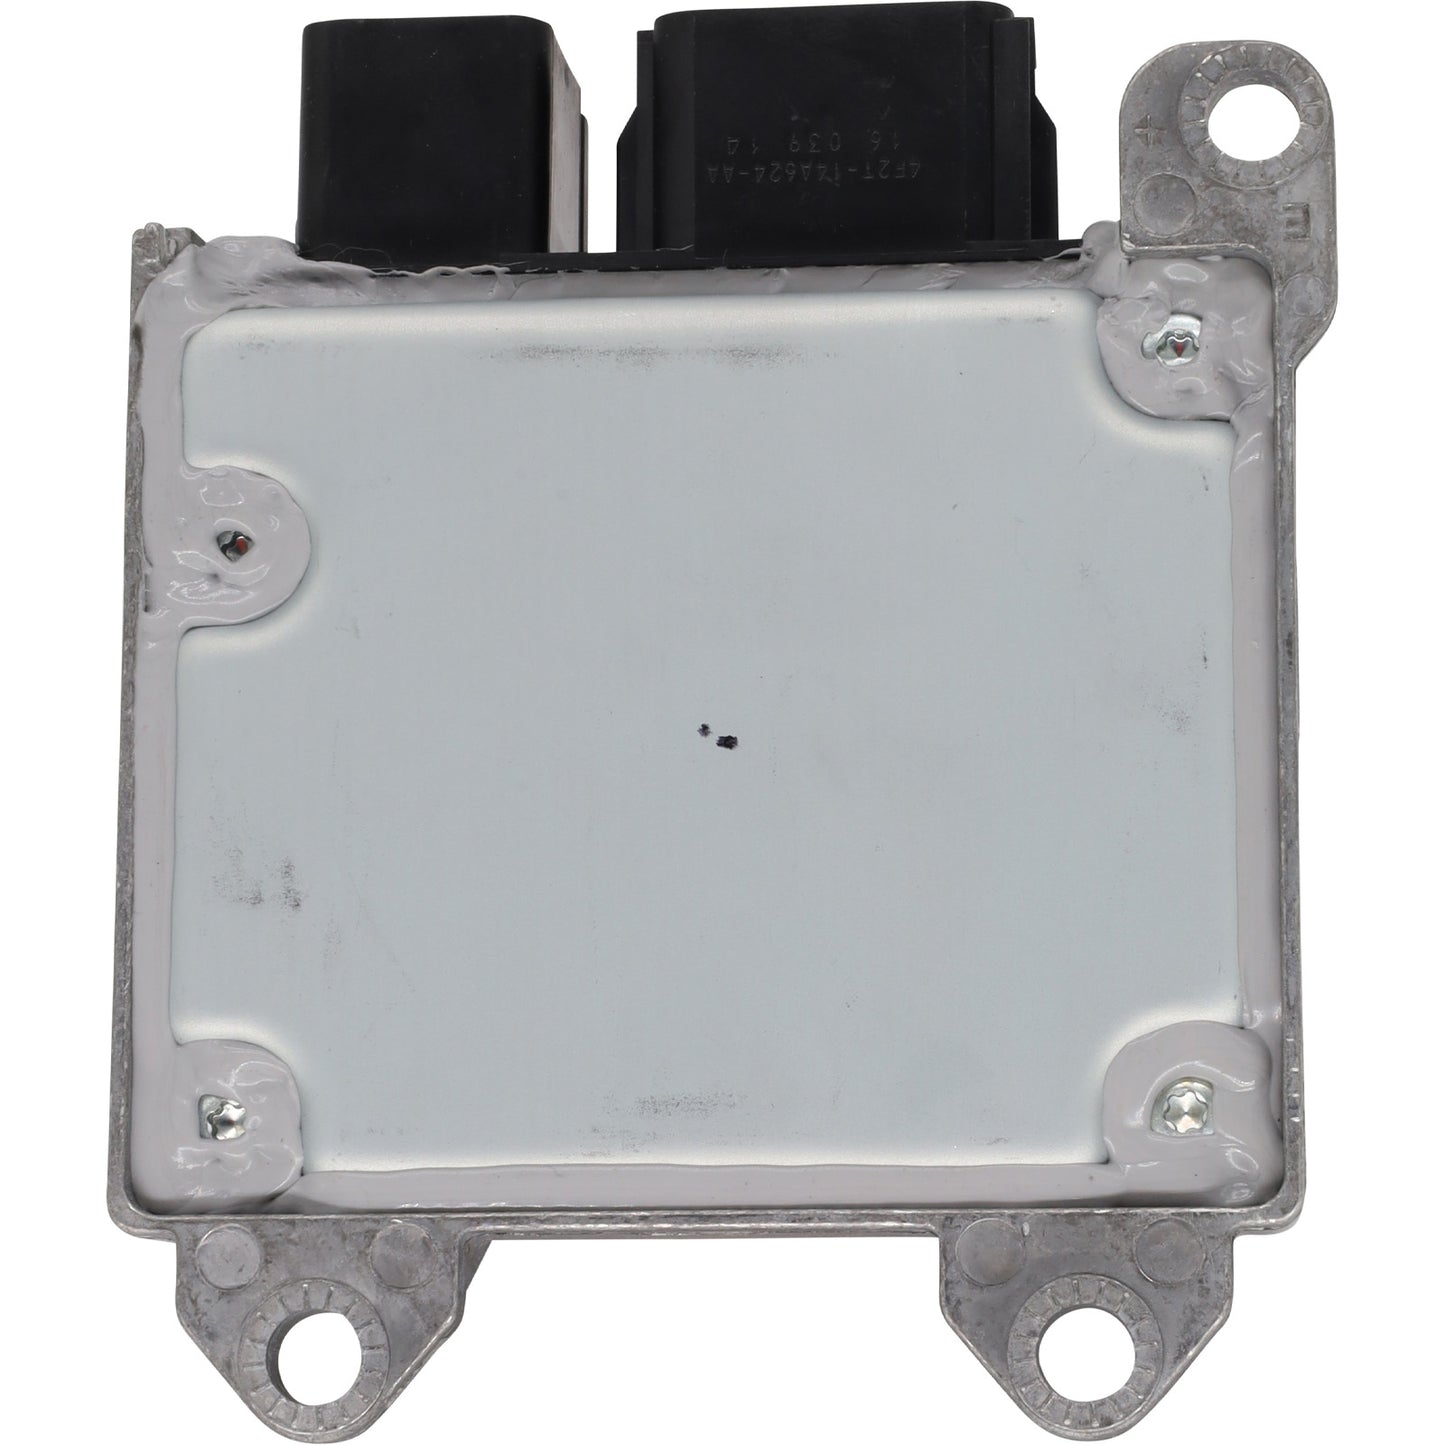 Genuine Airbag Module suit Ford Falcon FG With Side Airbags